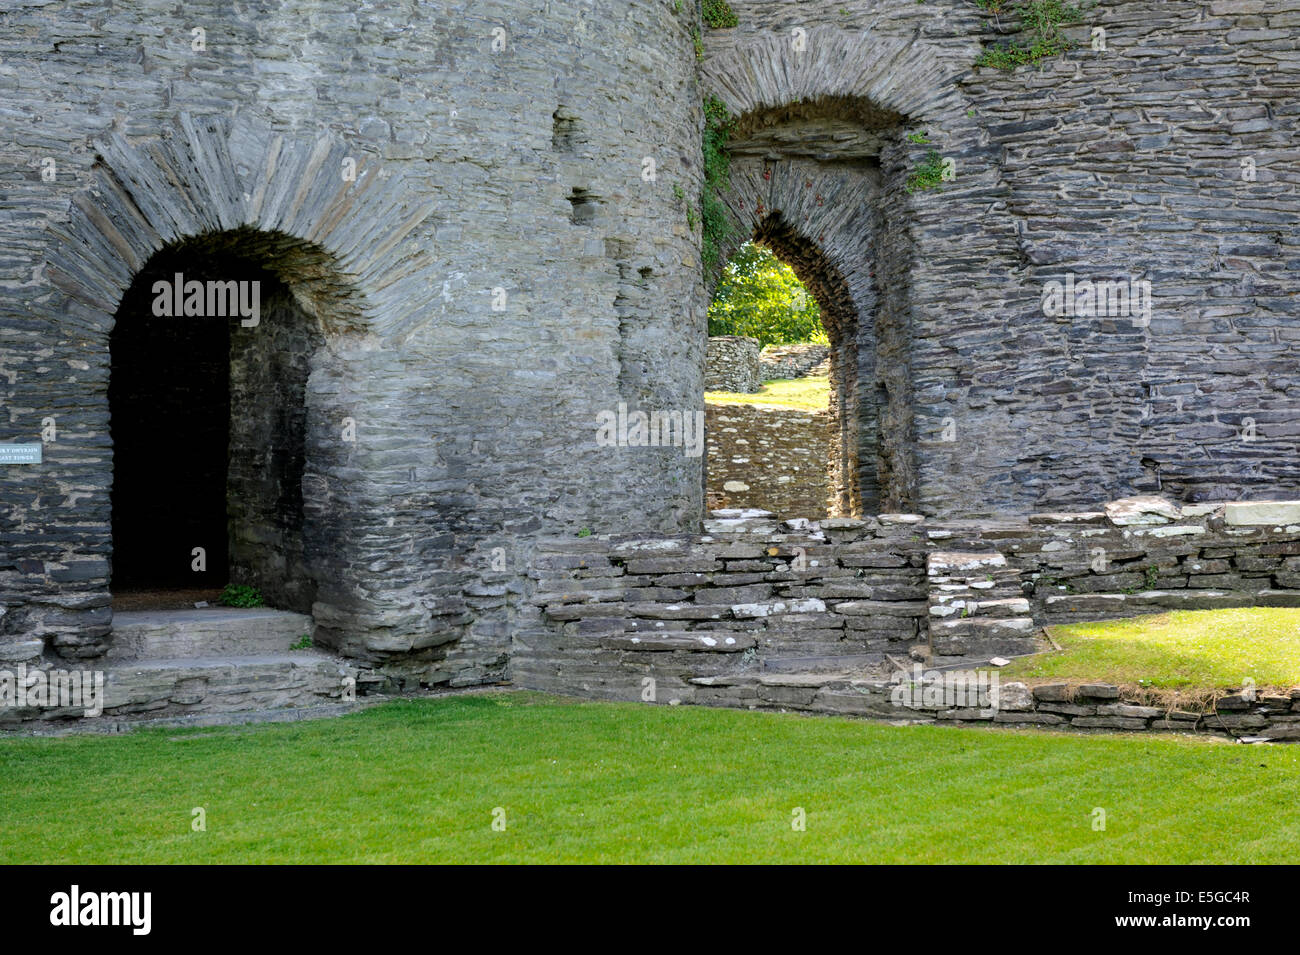 Arched doorways in Cilgerran Castle, Pembrokeshire, west Wales illustrating circular and pointed arch types Stock Photo